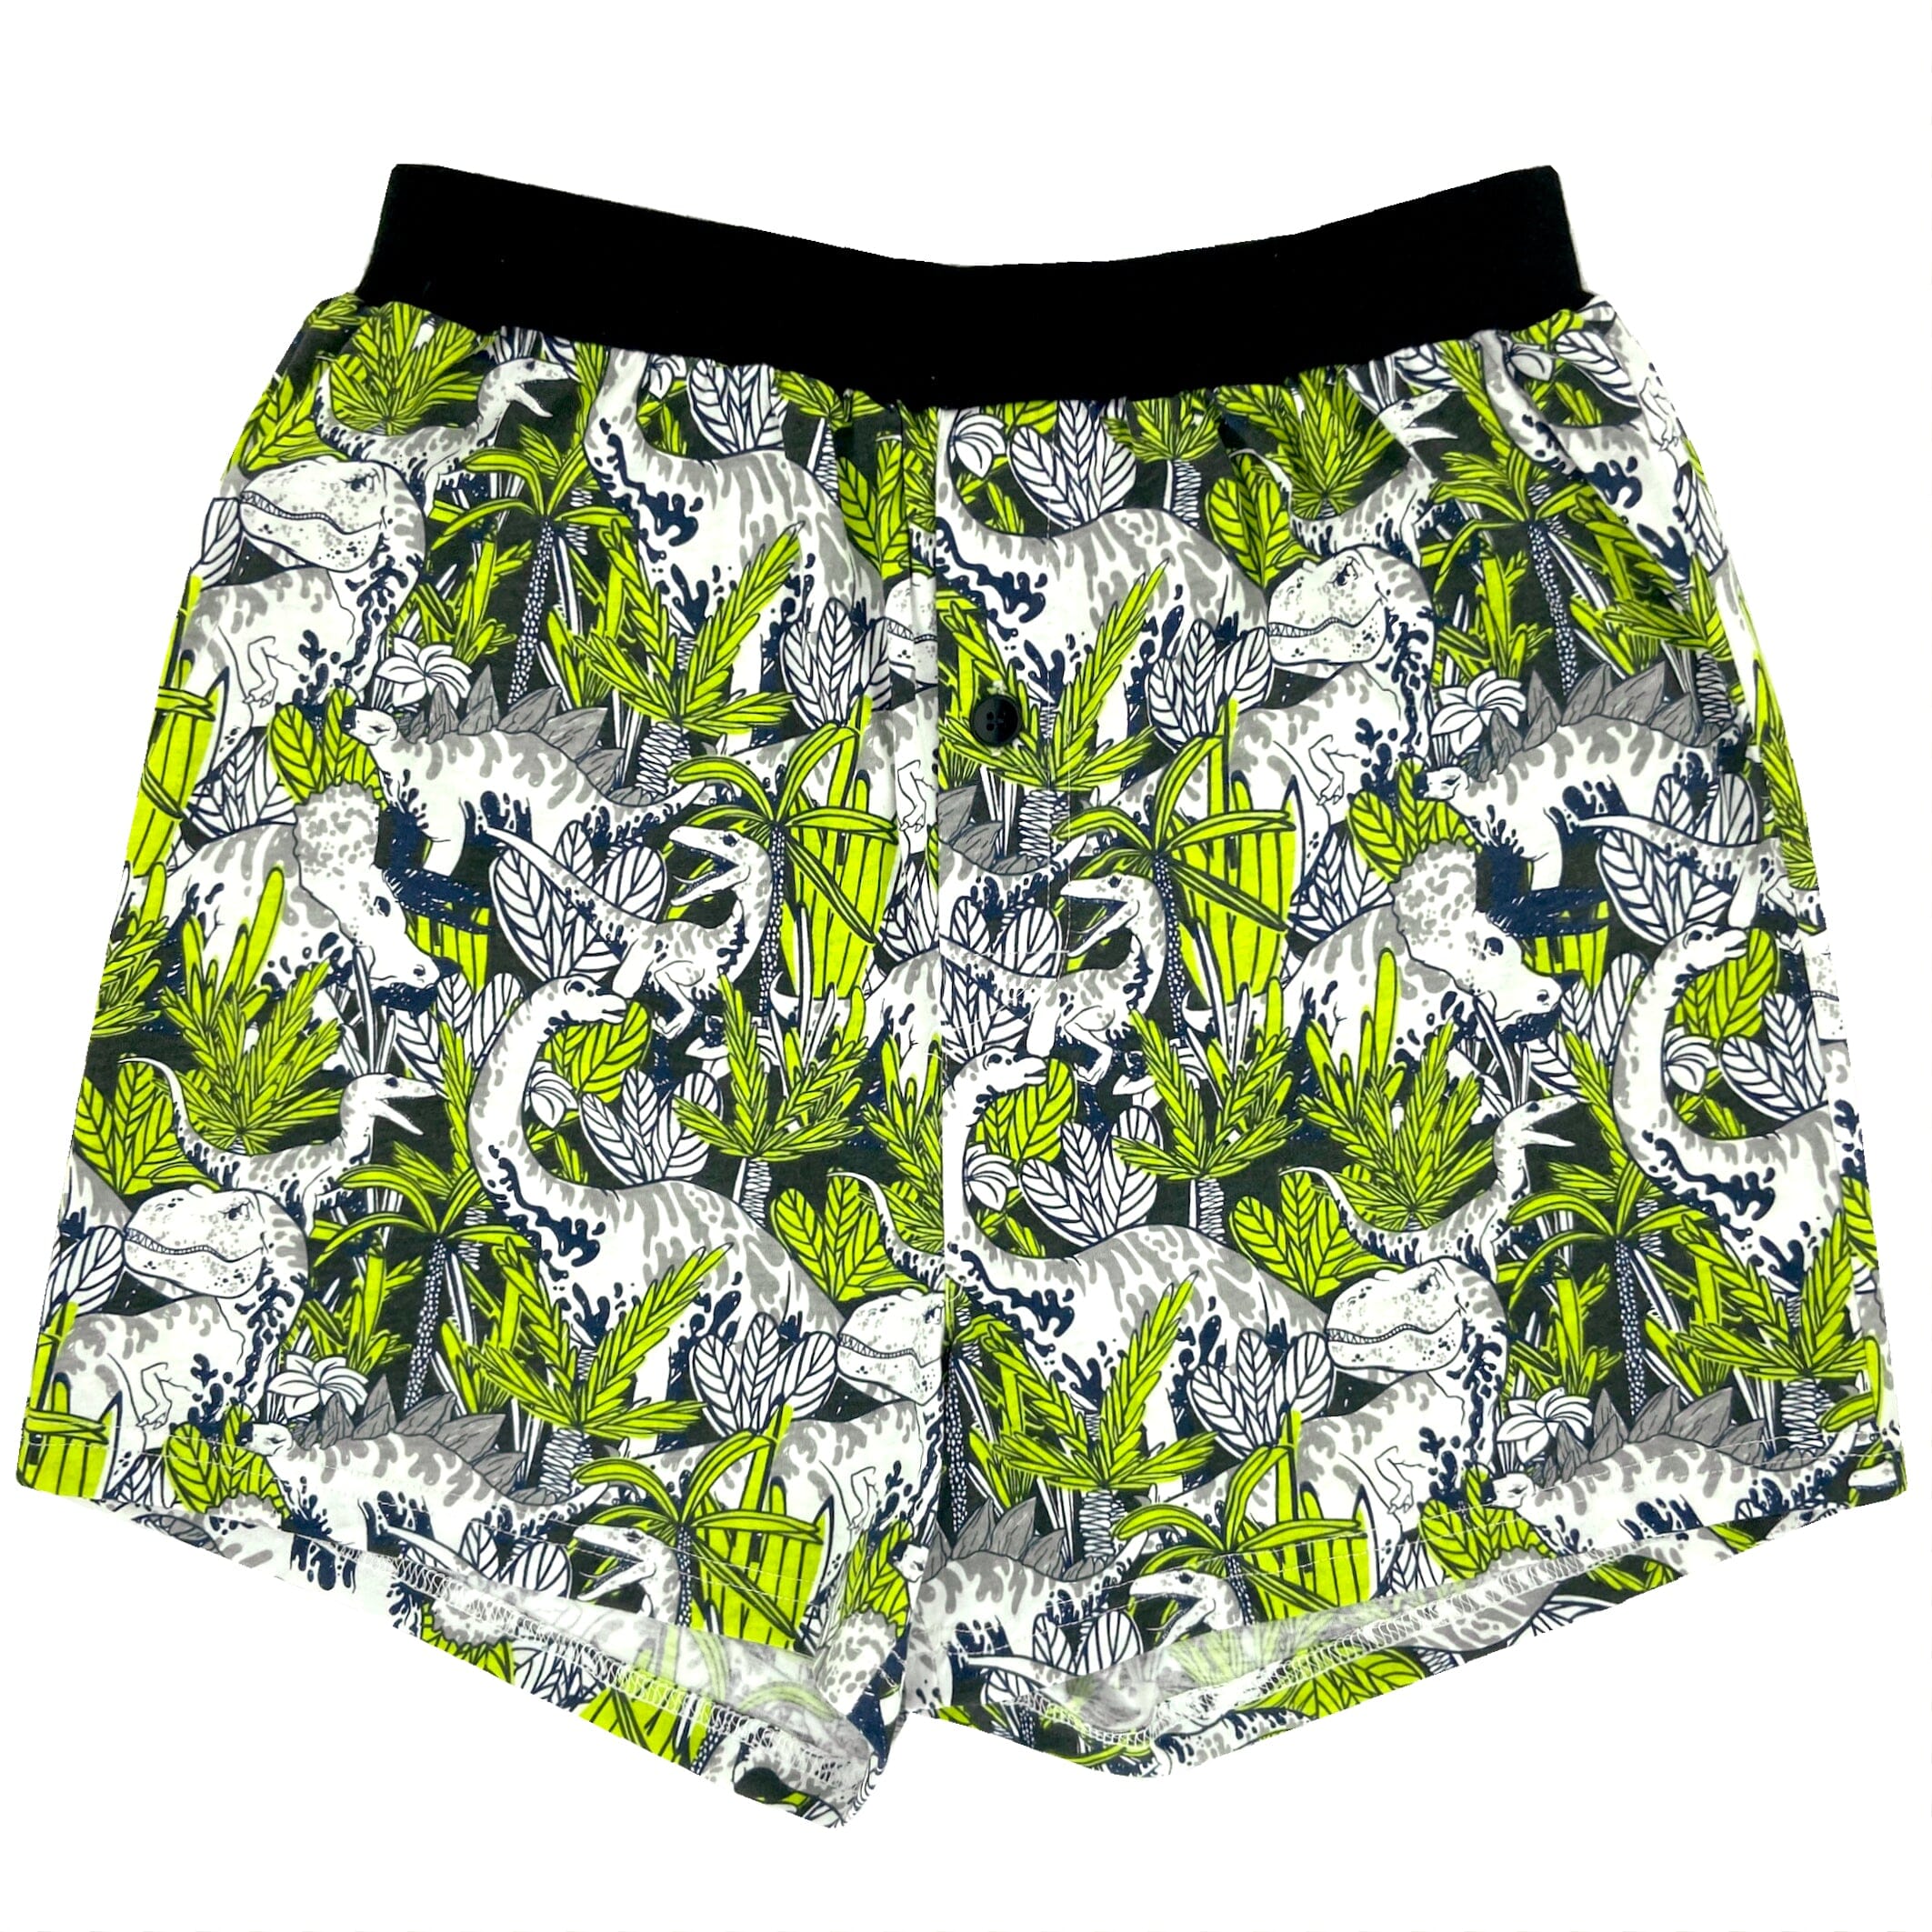 Comfy Loungewear Dinosaur All Over Print Cotton Pajama Shorts for Men